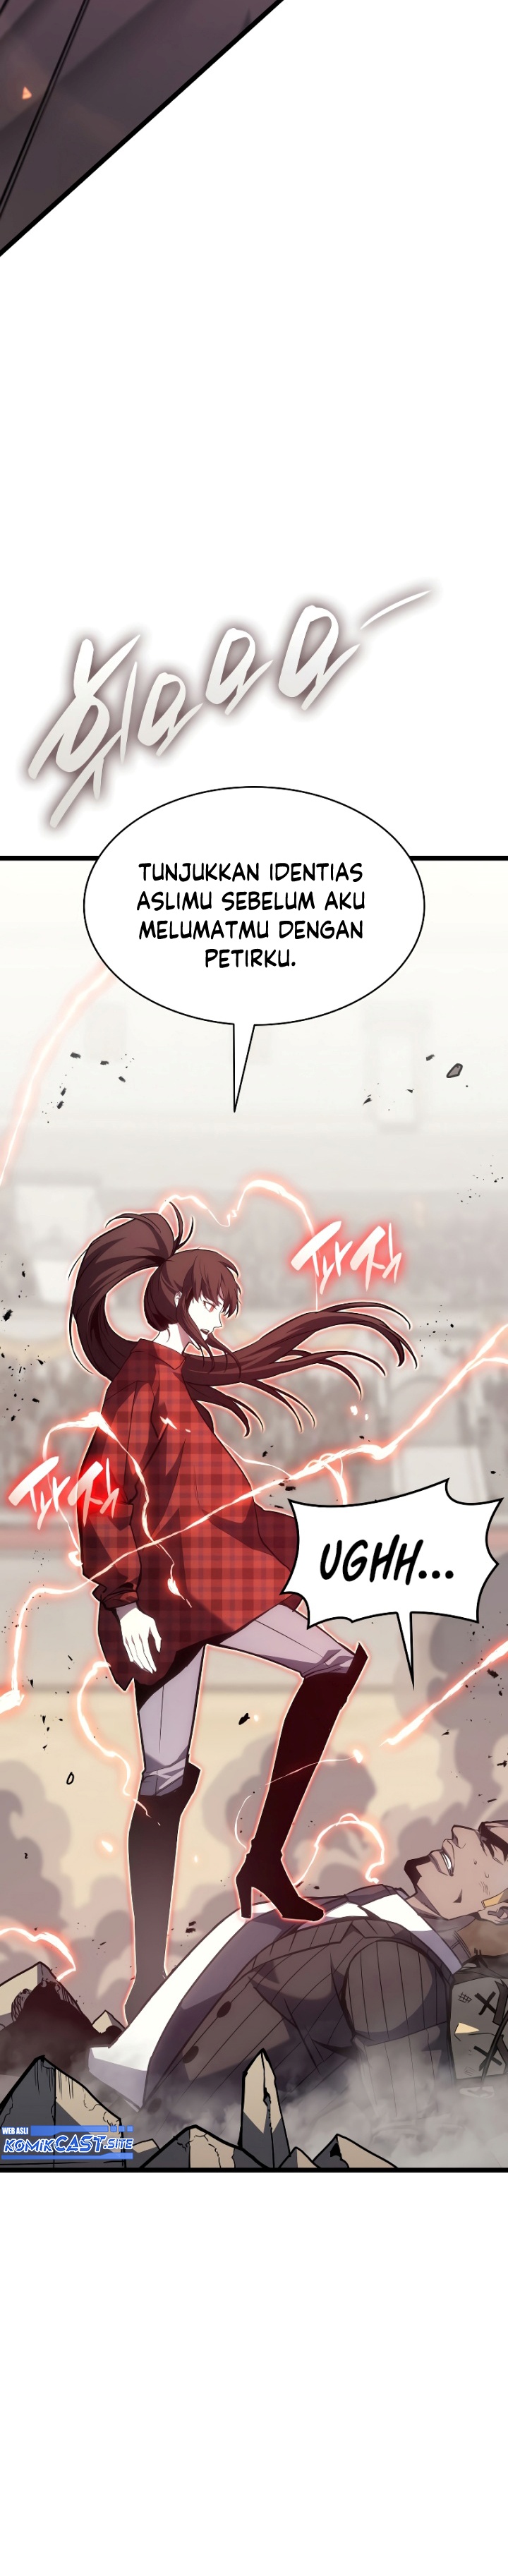 A Disaster-Class Hero Has Returned Chapter 64